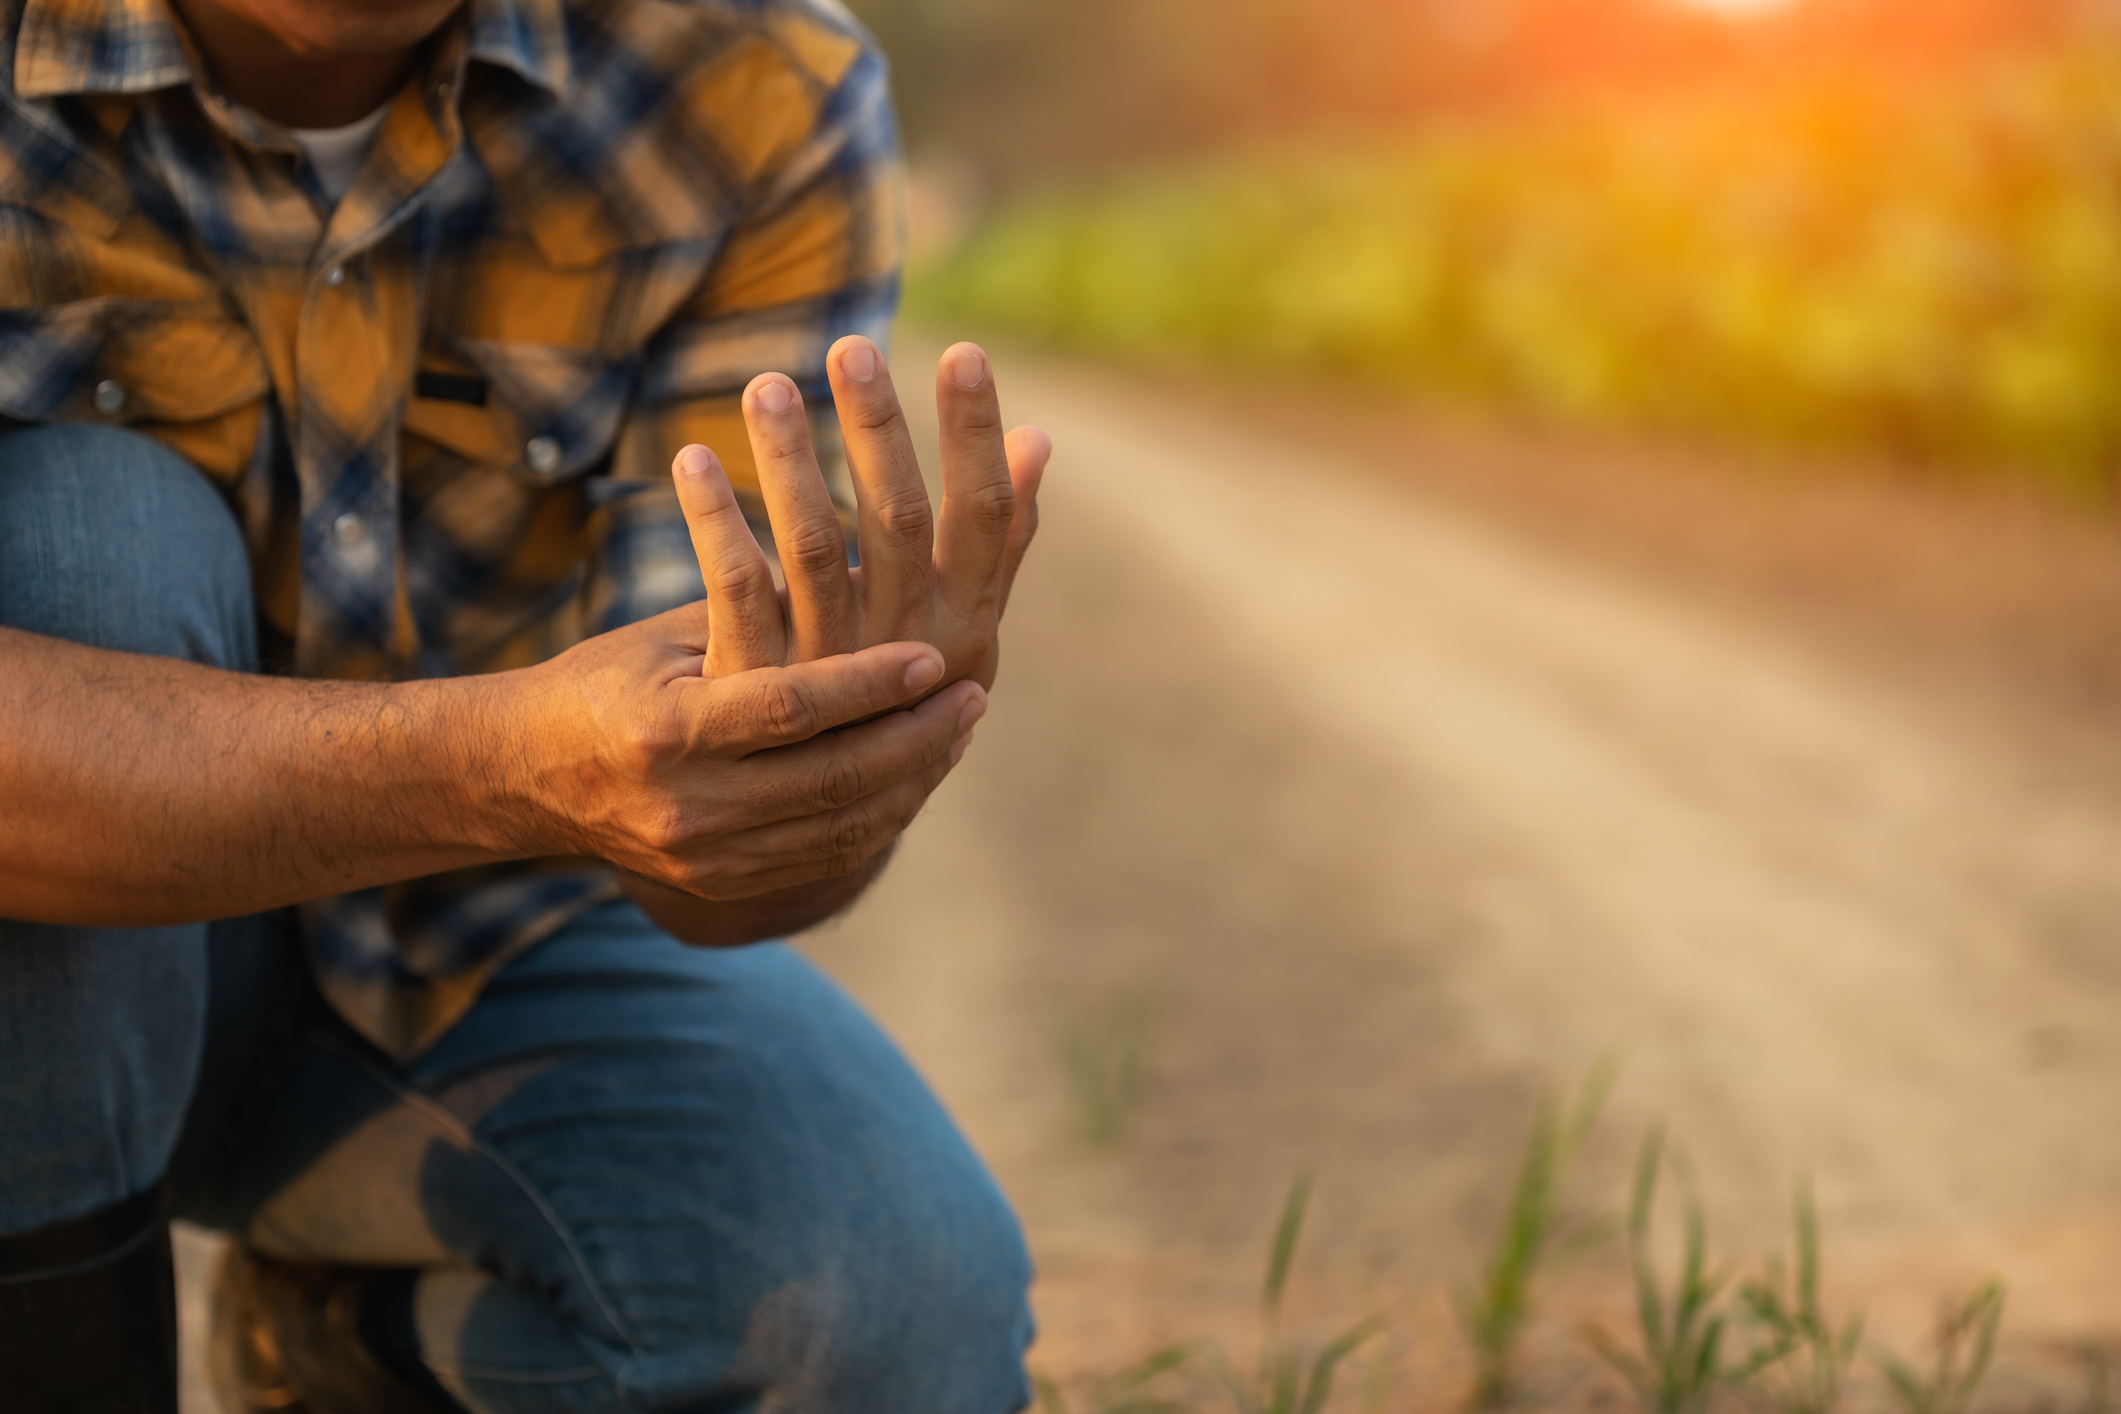 Injuries or Illnesses that can happen to farmers while working. Man is using his hand to cover over wrist because of hurt, pain or feeling ill. (Photo: iStock - PhanuwatNandee)